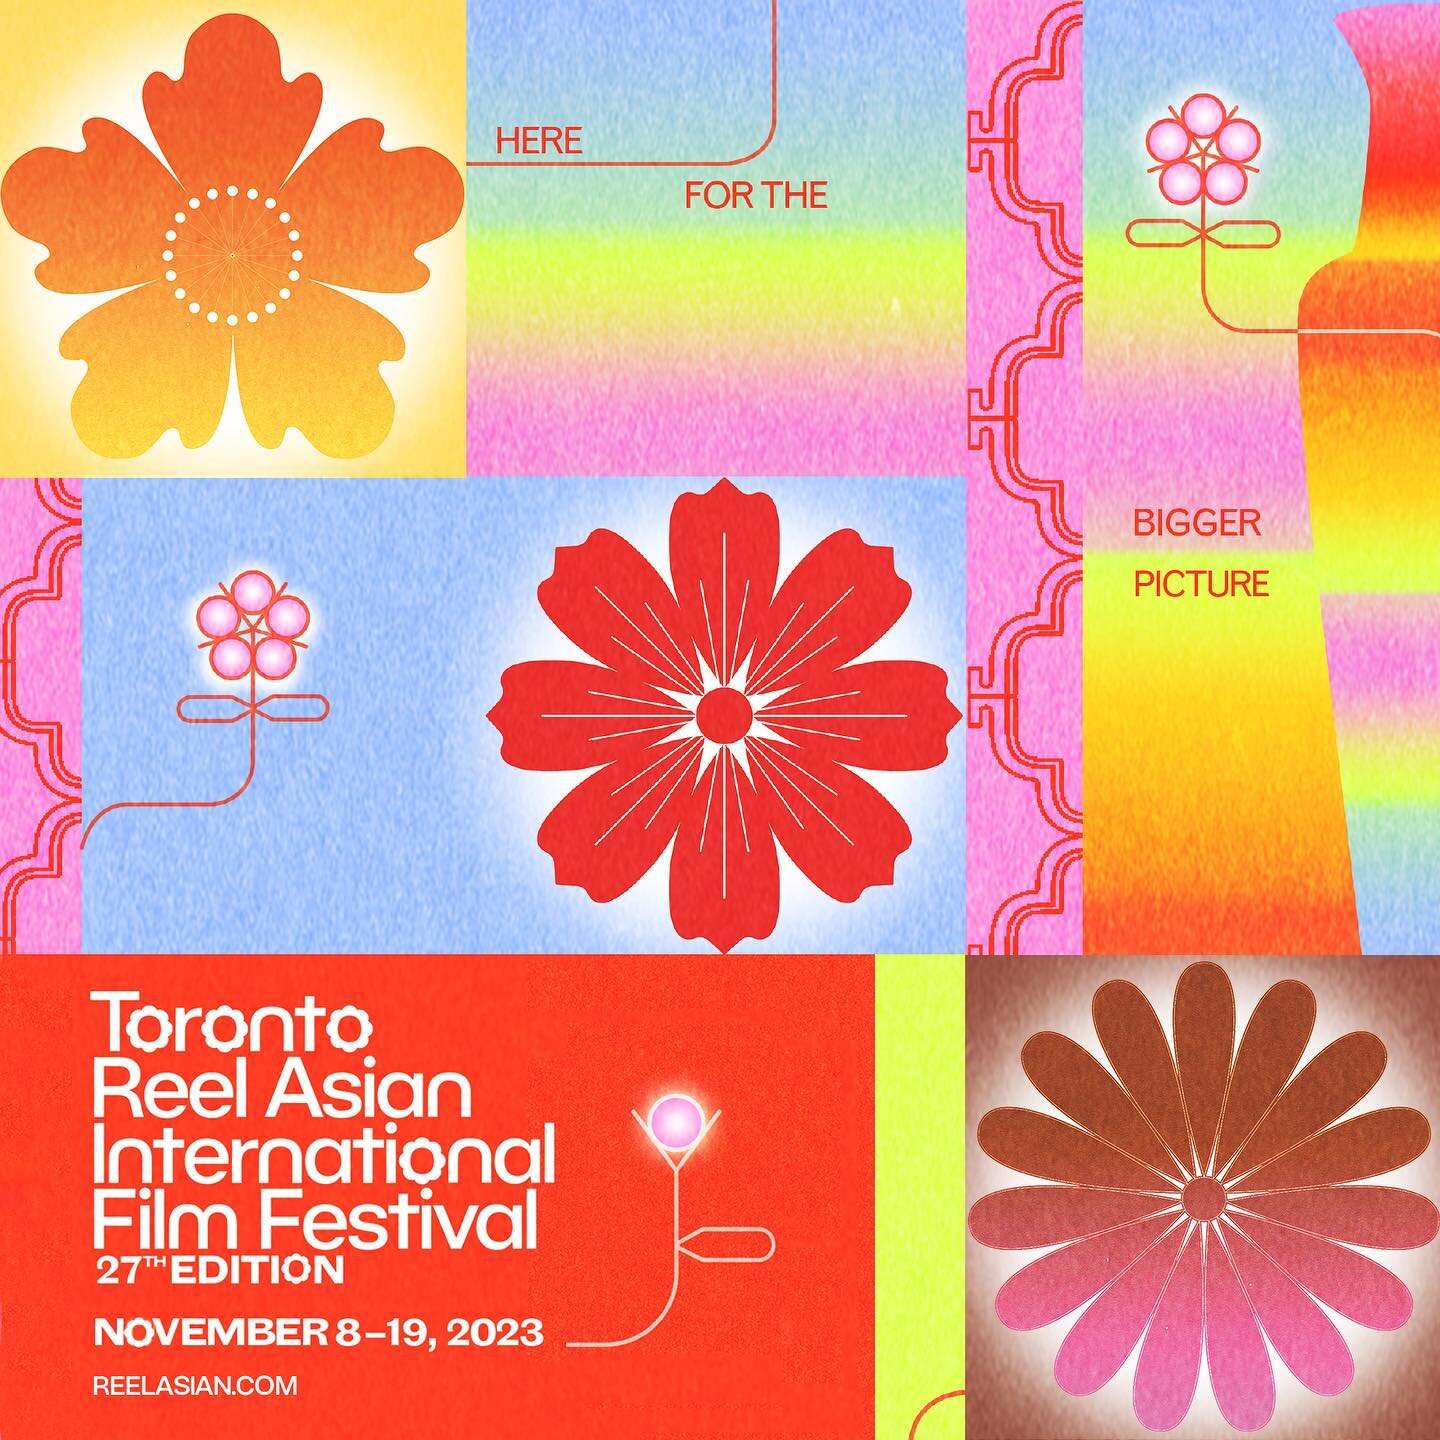 The 27th Edition Toronto Reel Asian International Film Festival is November 8&ndash;19, 2023! Immerse yourself in pan-Asian cinema through feature films and shorts programmes from all over the world. This includes FREE screenings for select films and